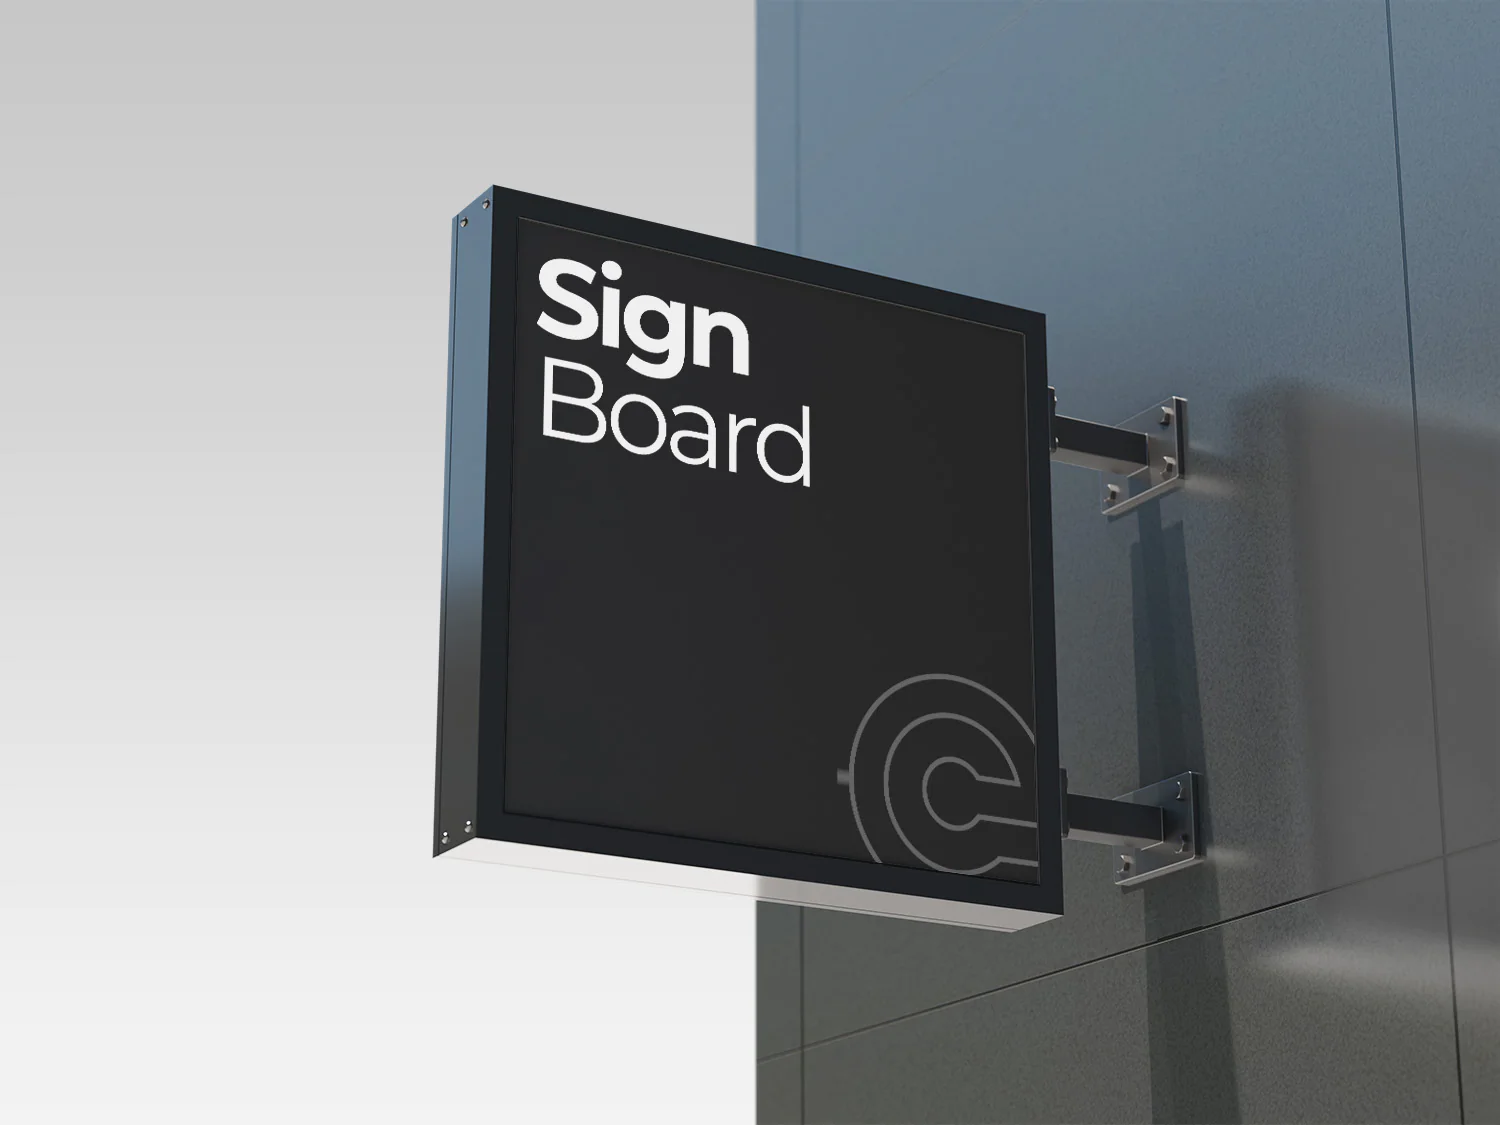 Business Signs: How to Make Eye-Catching Promotional Signs - Exhibit ...